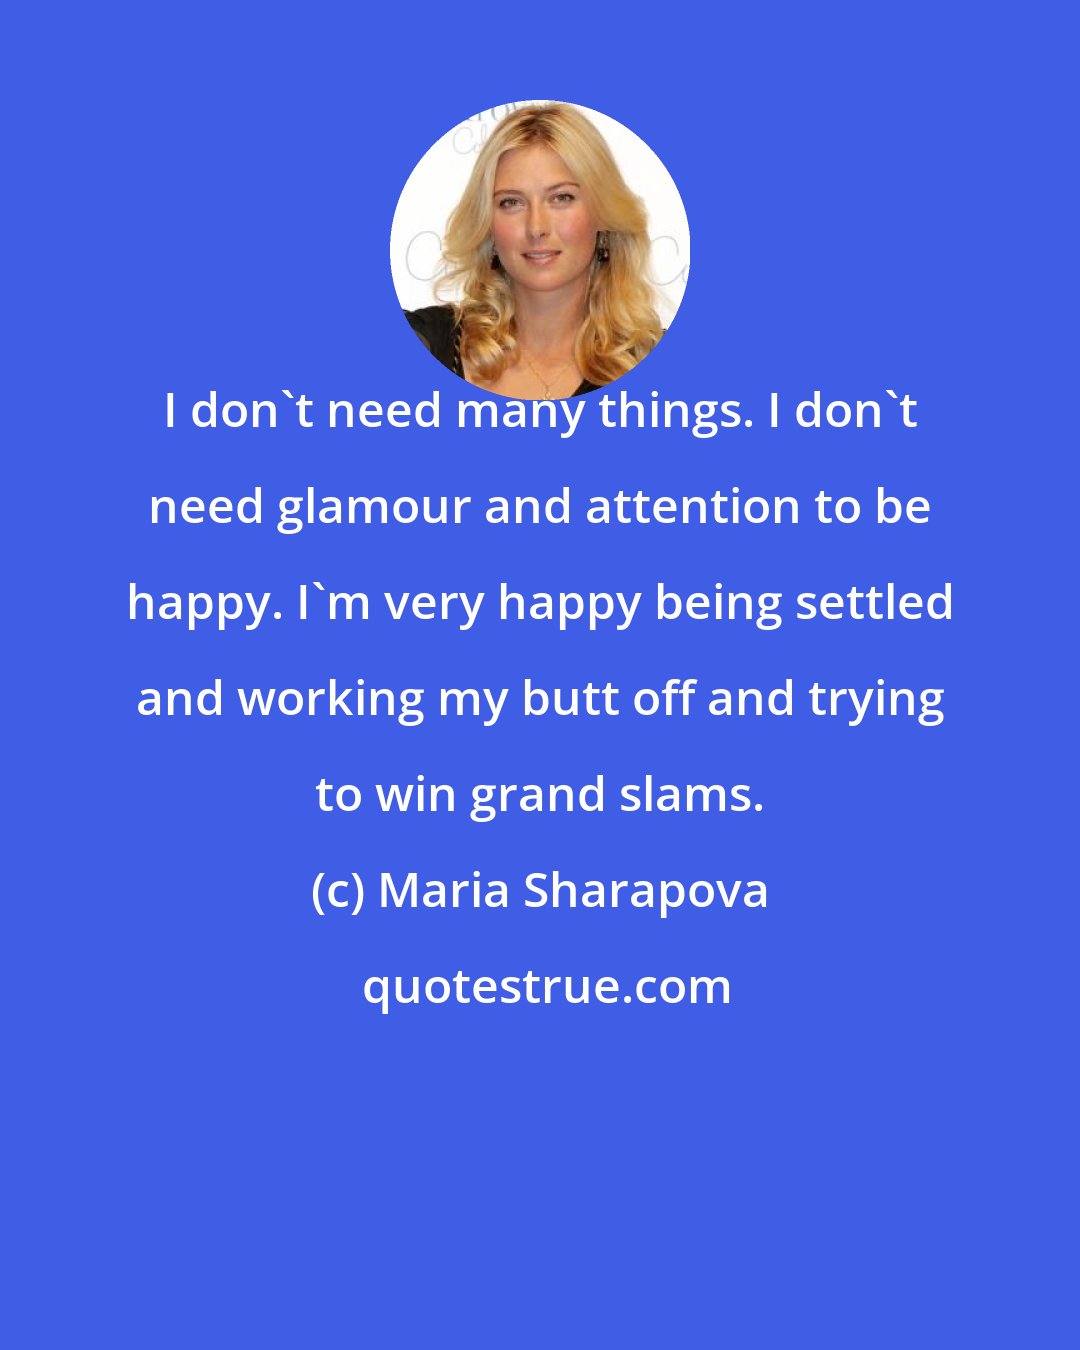 Maria Sharapova: I don't need many things. I don't need glamour and attention to be happy. I'm very happy being settled and working my butt off and trying to win grand slams.